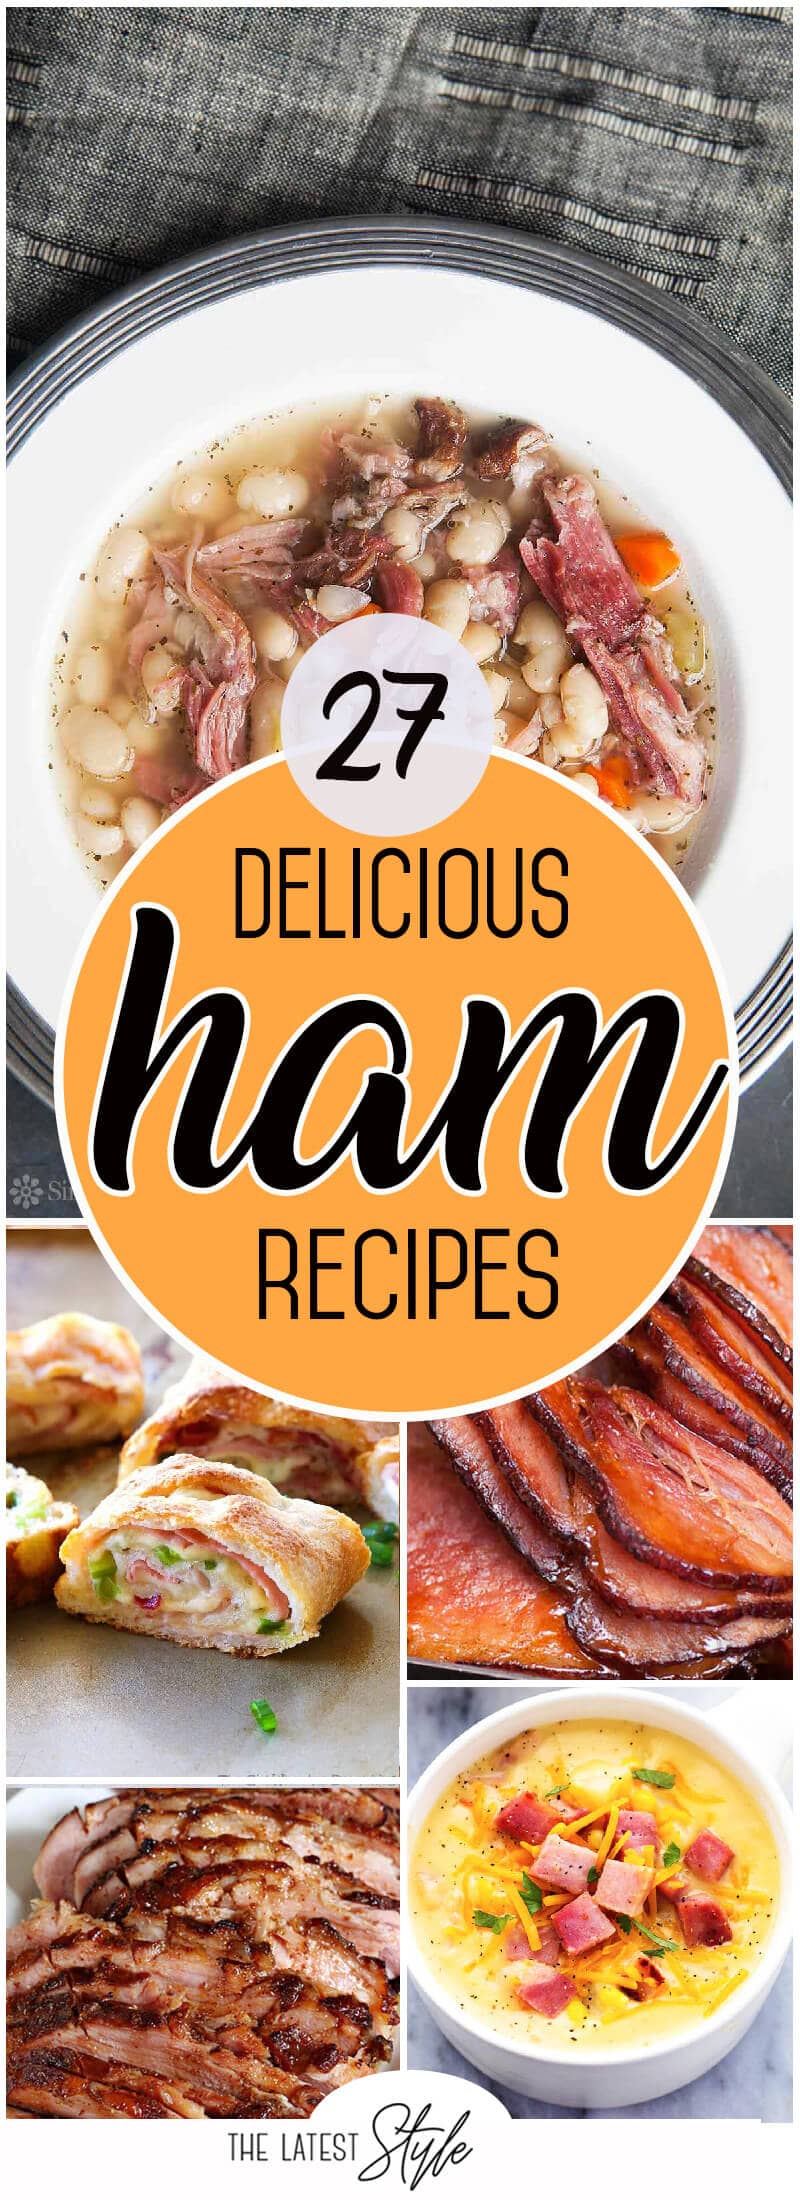 27 Delicious Ham Recipes the Whole Family will Love this Easter